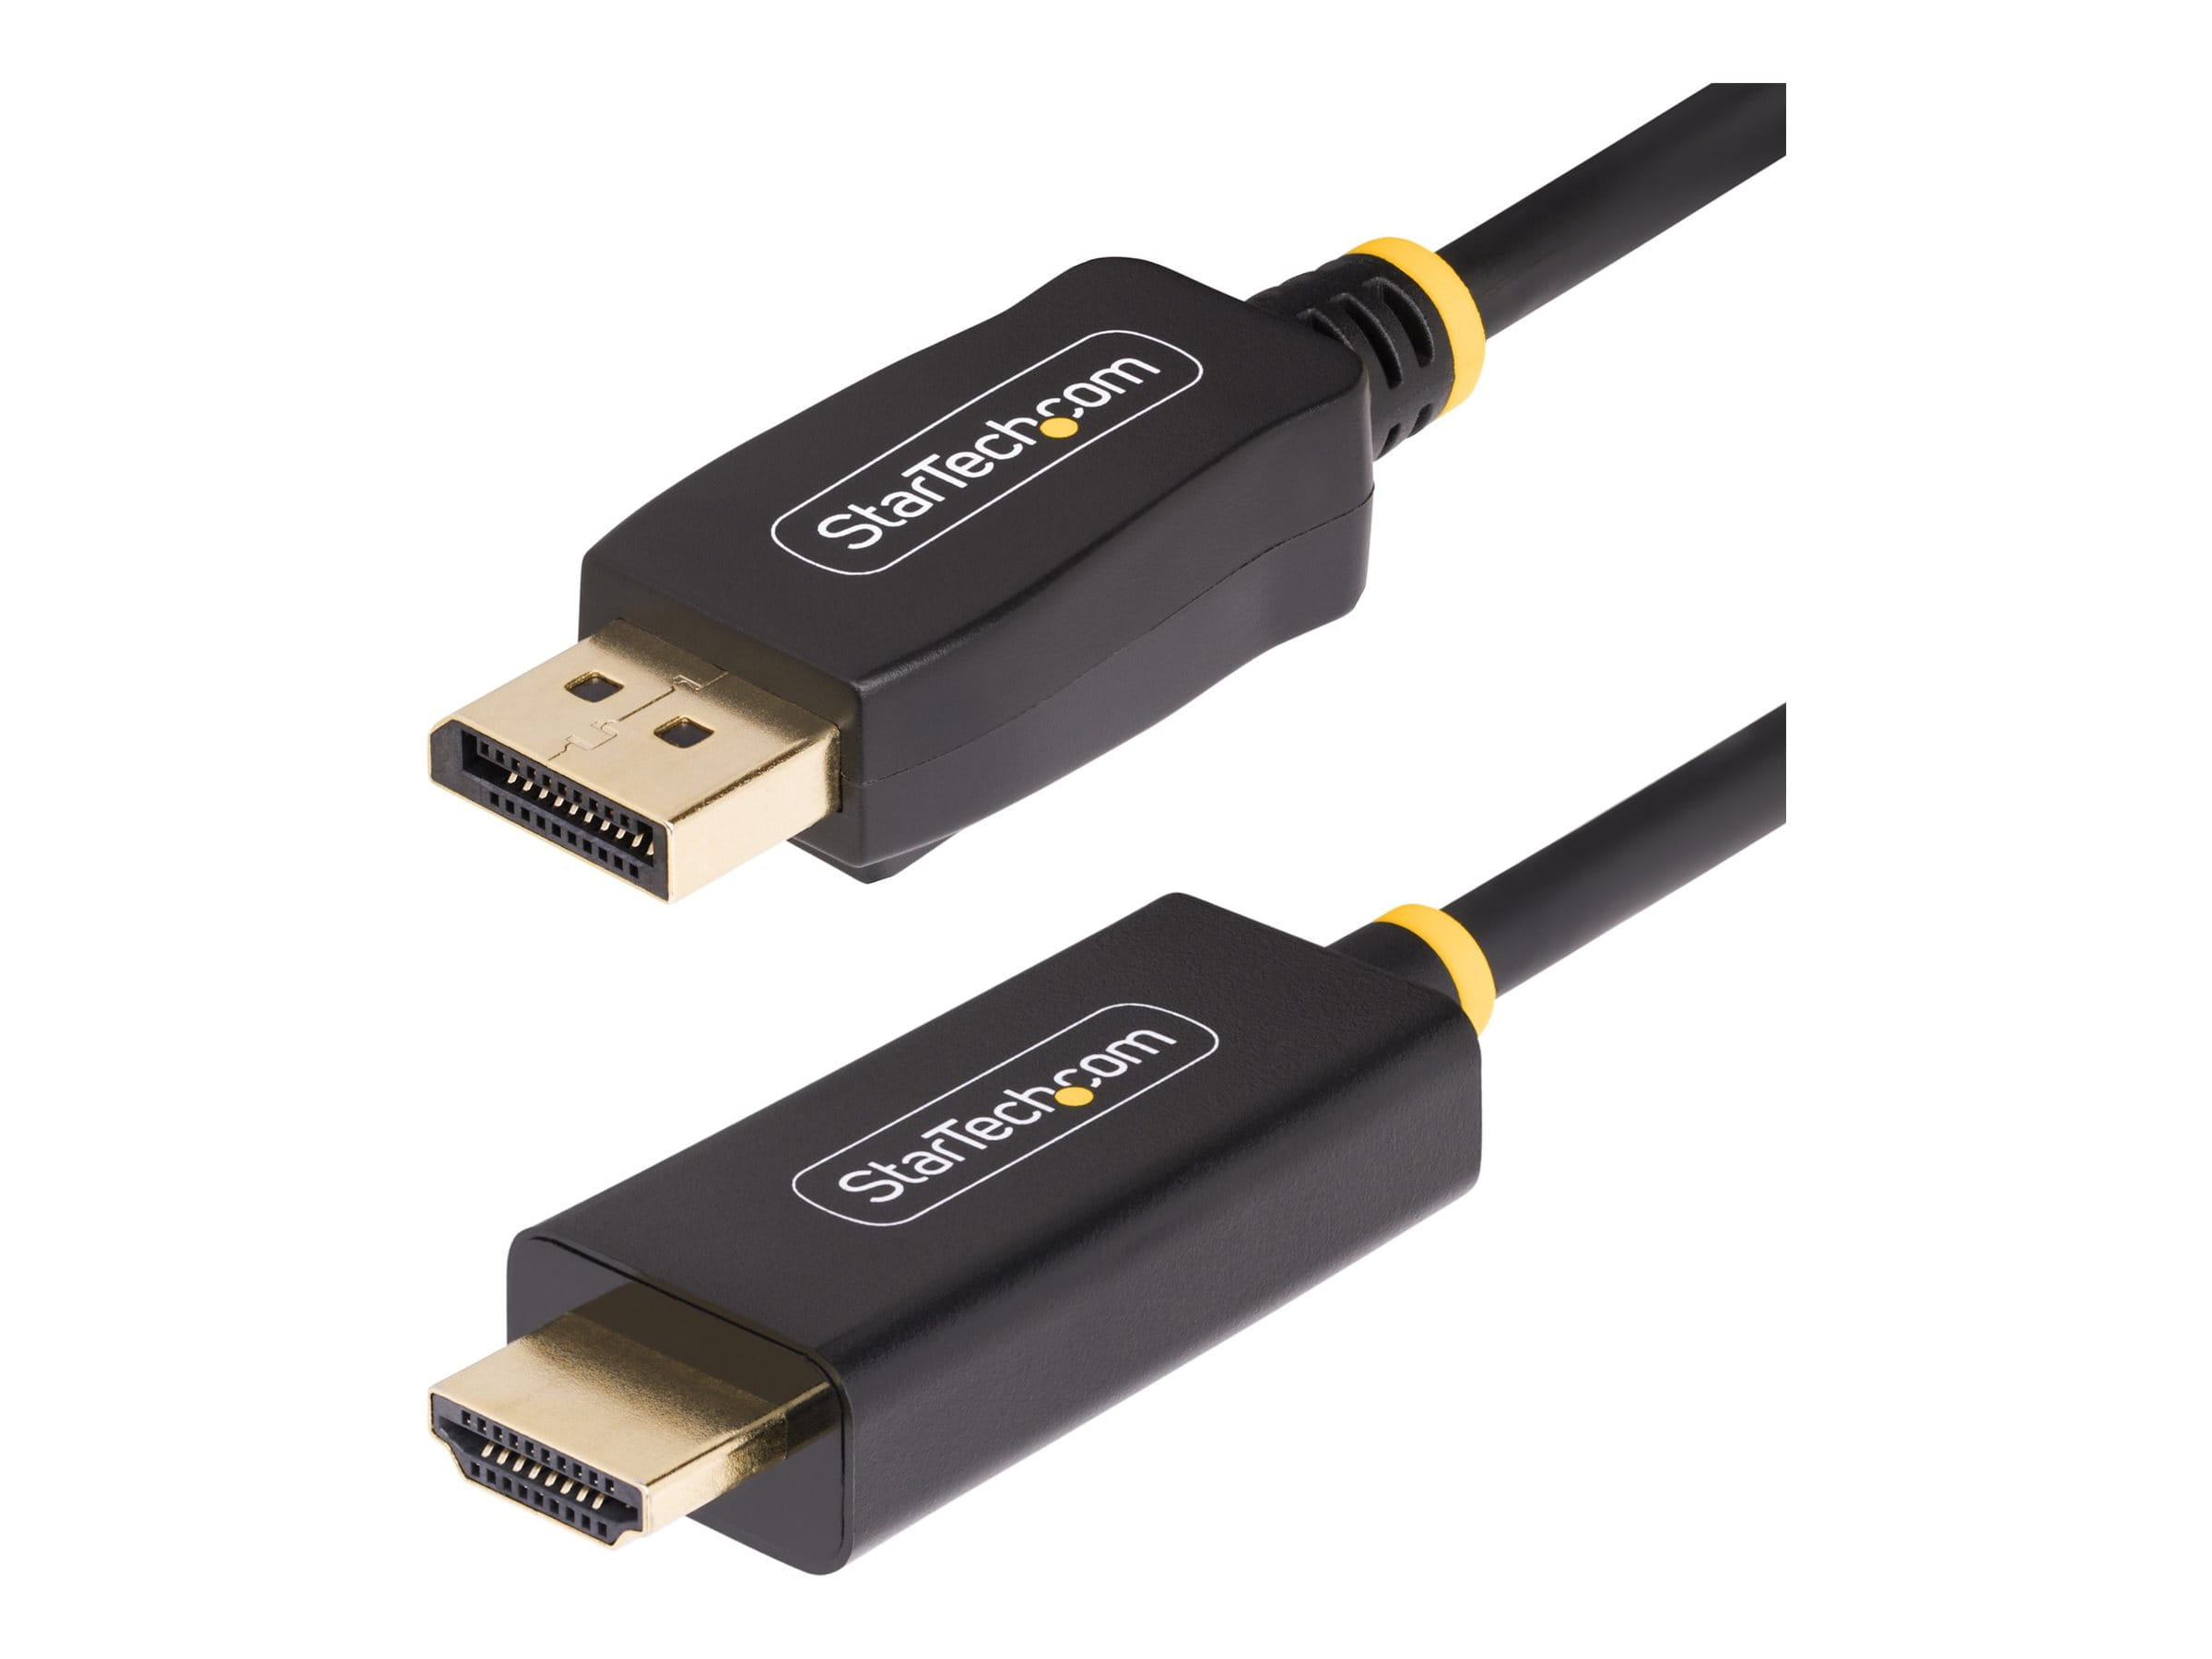 StarTech.com 9.8ft (3m) DisplayPort to HDMI Adapter Cable, 4K 60Hz with HDR, DP to HDMI 2.0b, Active Video Converter, DisplayPort Desktop to HDMI Monitor, M/M - DisplayPort to HDMI Cord (10F-DP-HDMI-4K60-HDR)